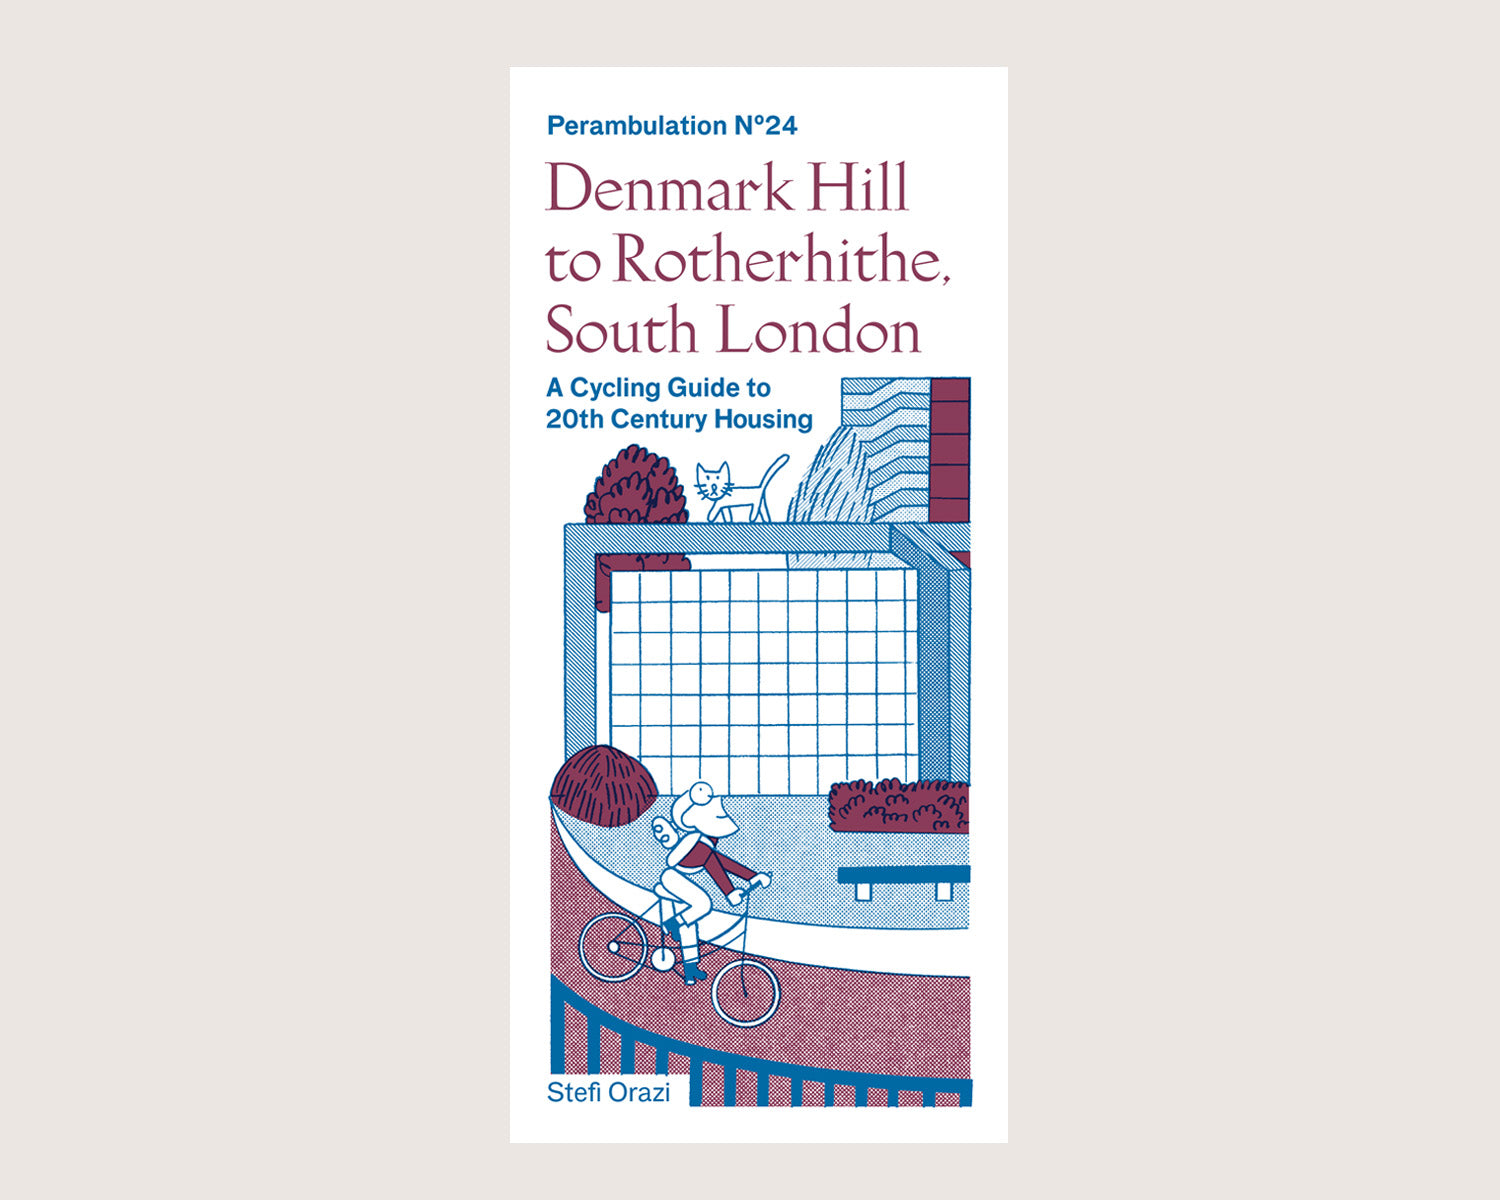 NEW! Perambulation Nº24—Cycling Guide, Denmark Hill to Rotherhithe, South London by Stefi Orazi